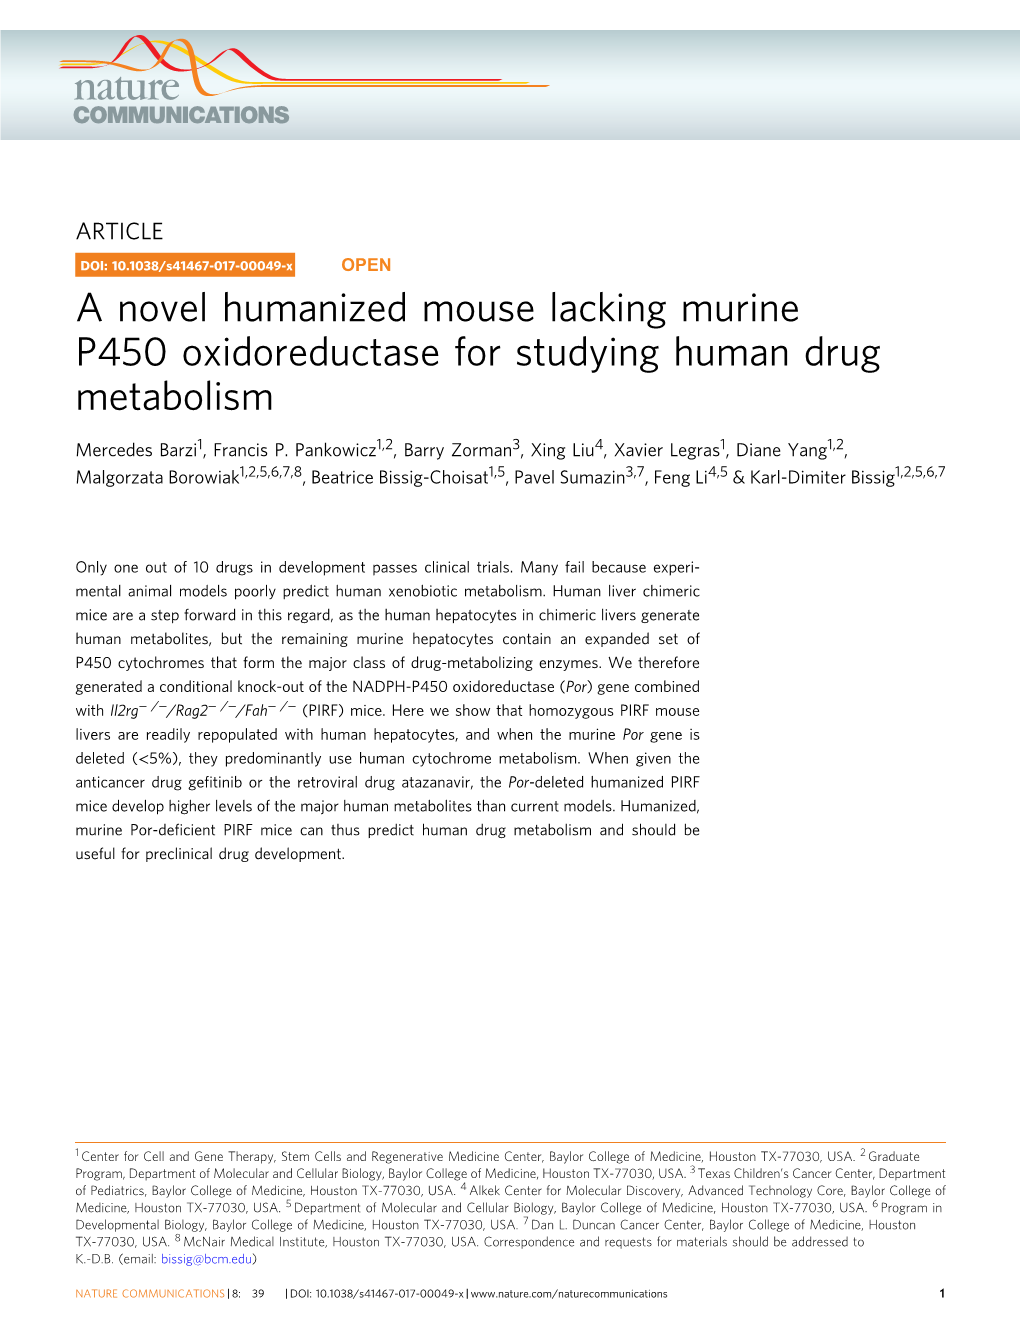 A Novel Humanized Mouse Lacking Murine P450 Oxidoreductase for Studying Human Drug Metabolism